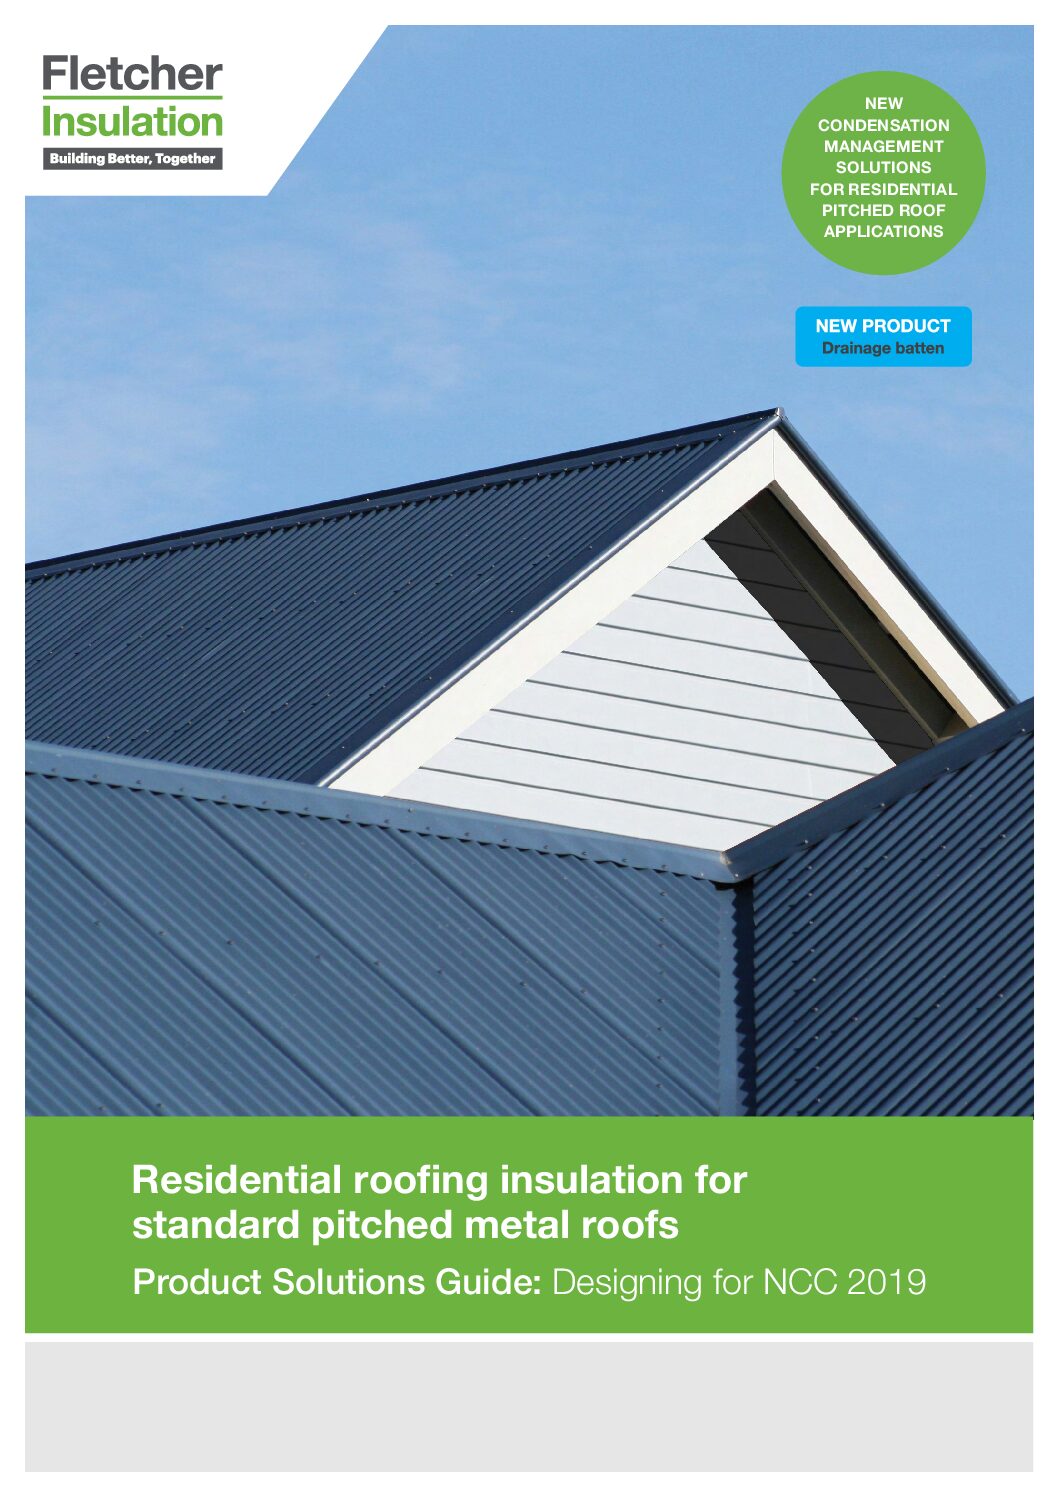 Residential Roofing Insulation for Standard Pitched Metal Roofs – Product Solutions Guide: Designing for NCC 2019